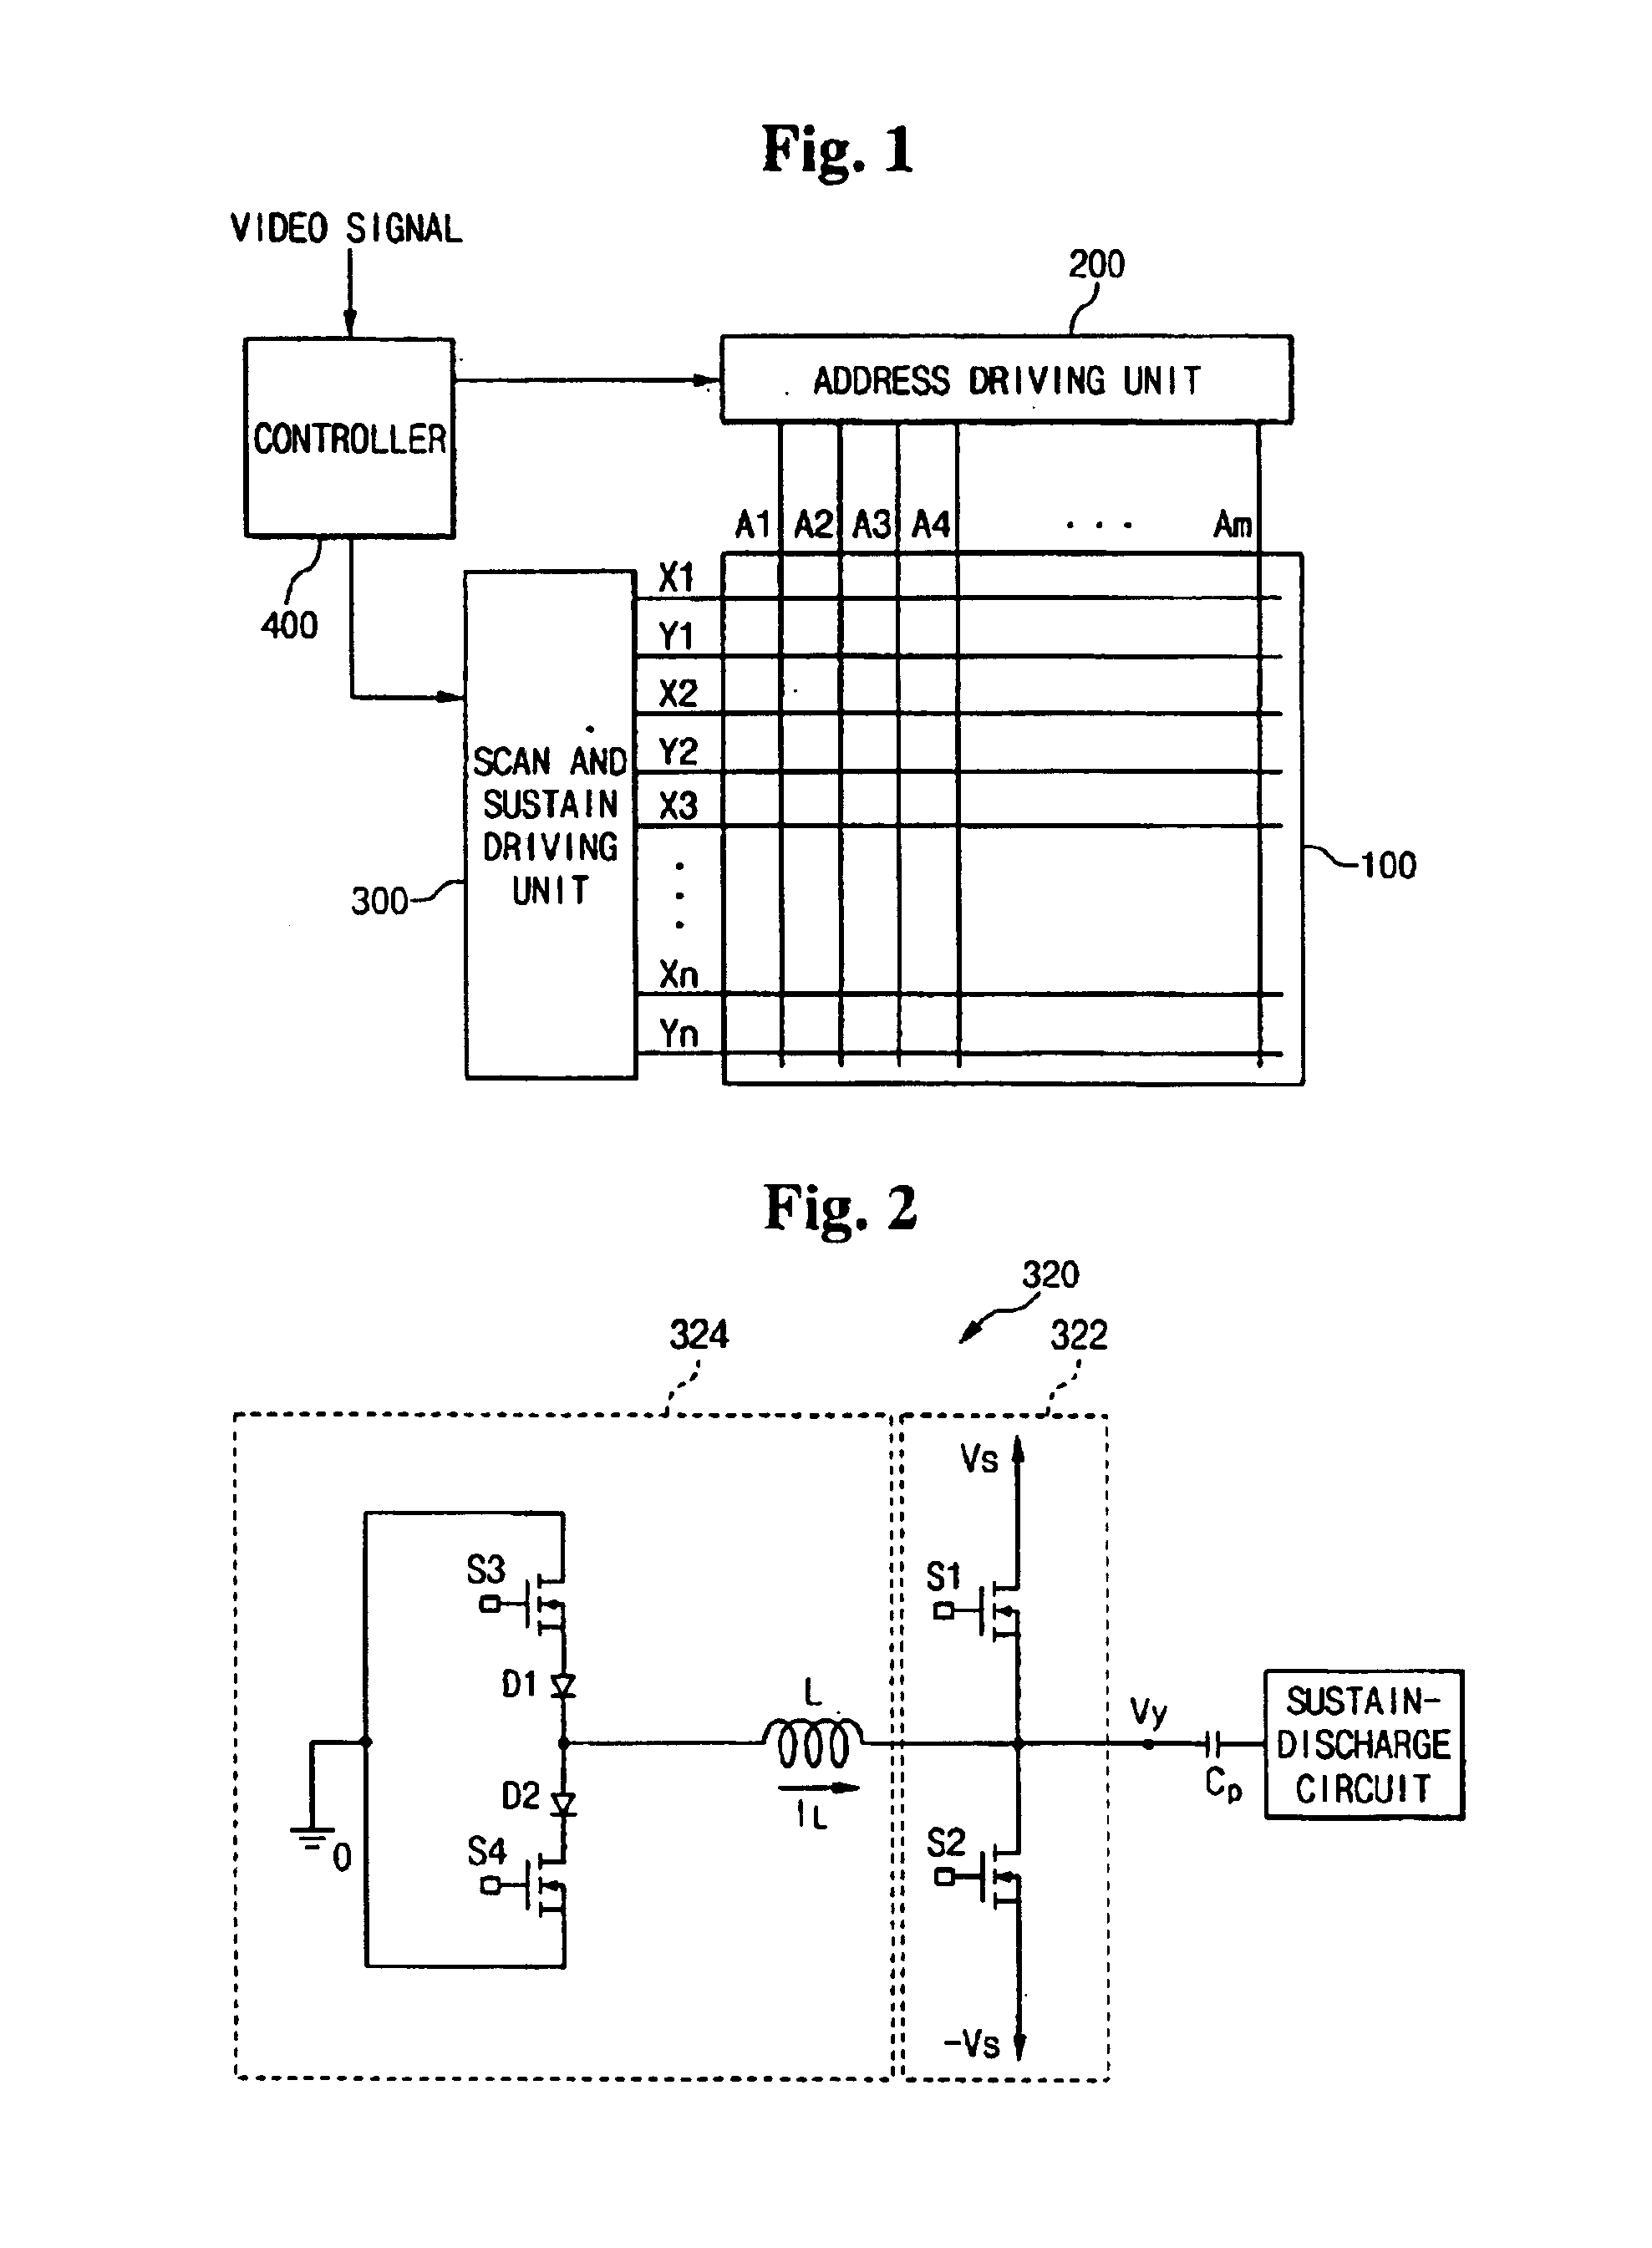 Apparatus and method for driving a plasma display panel